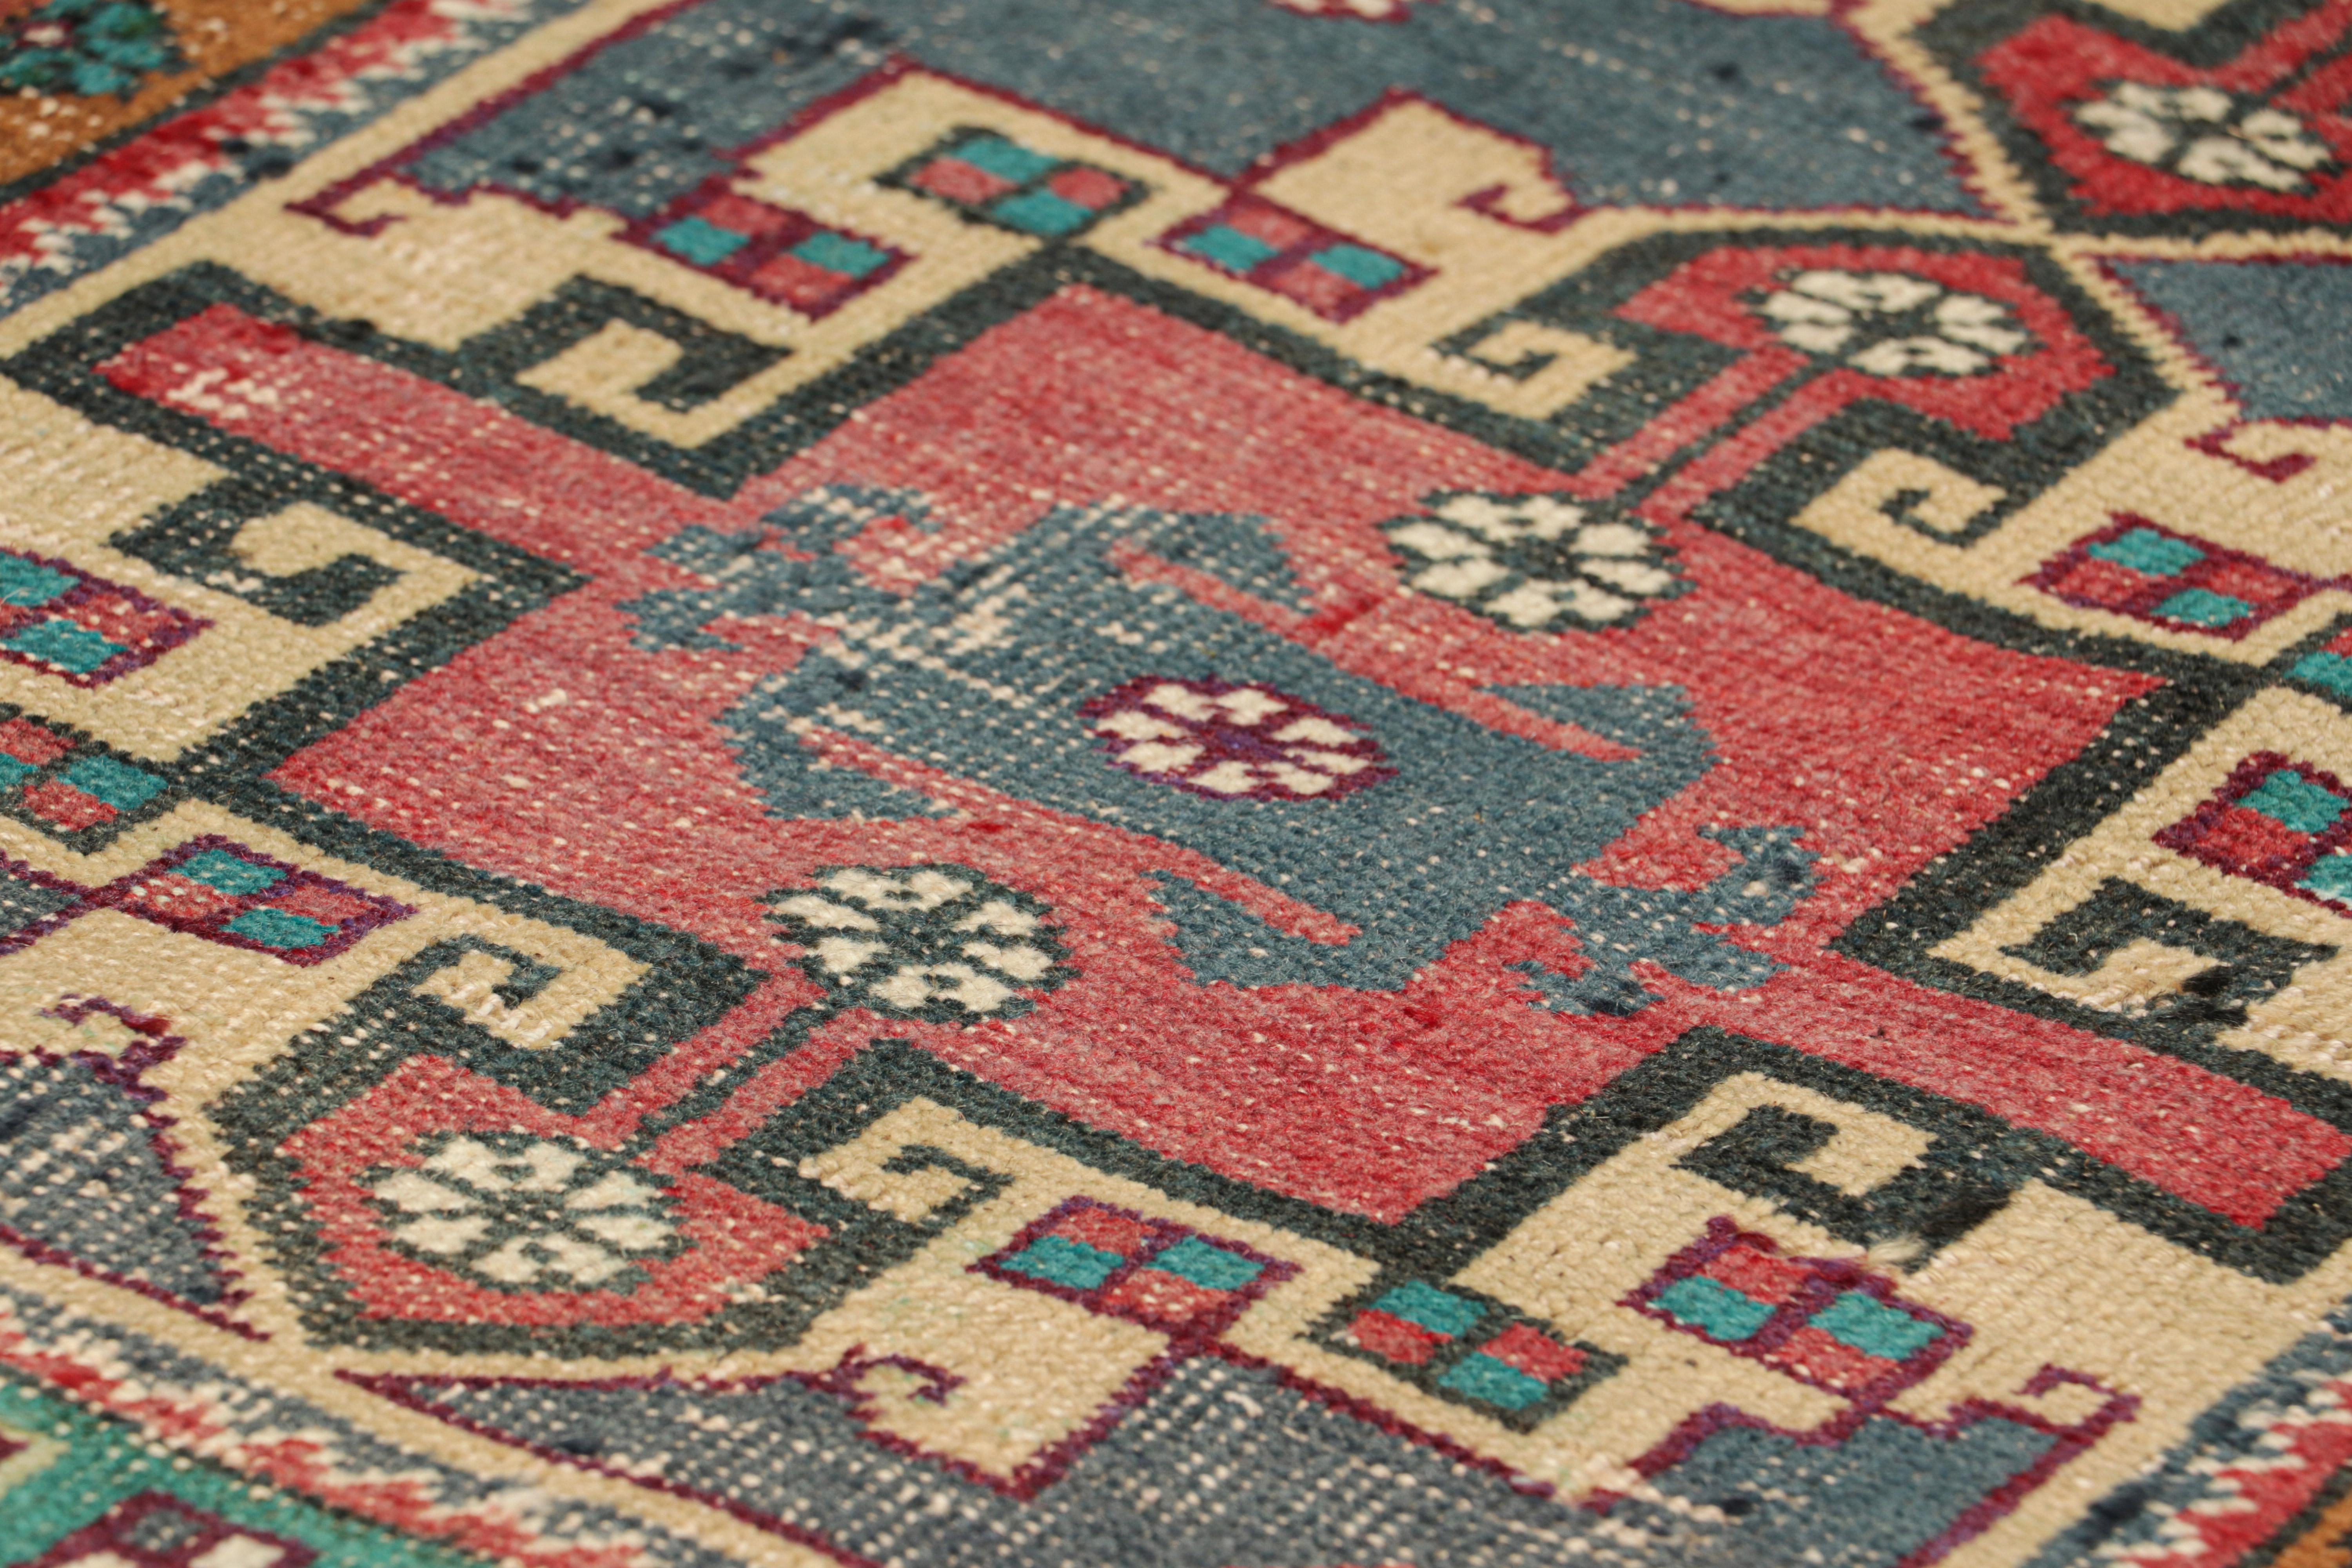 Hand-knotted in wool, originating from Turkey circa 1950-1960, this 2x3 vintage gift-sized rug is one of a very special set of twins from an exceptional mid-century curation of Oushak rugs new to Rug & Kilim’s collection.  

On the Design: